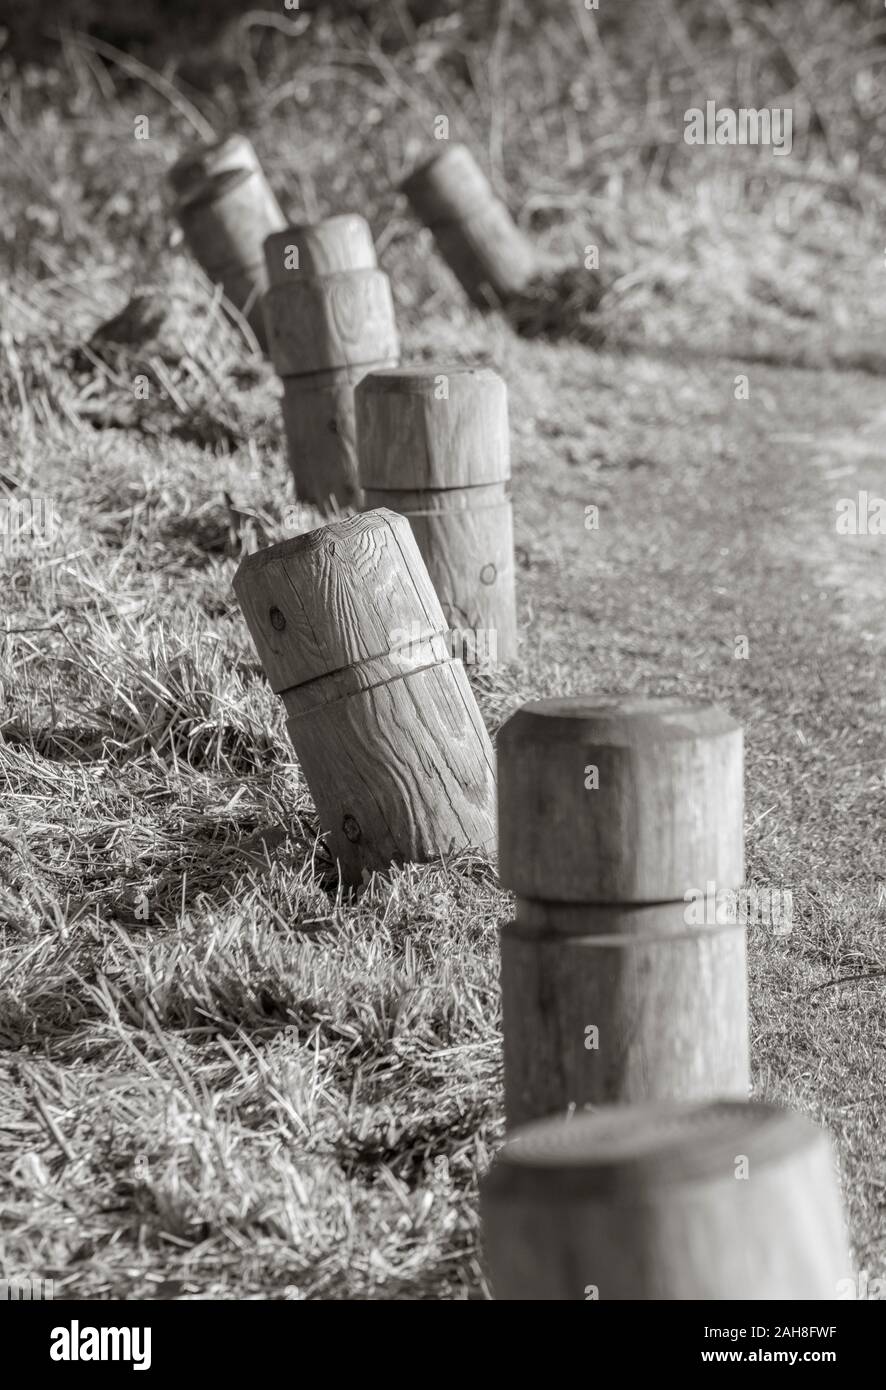 Misaligned timber bollards at public car park in Cornwall. Metaphor misaligned, out or order, alignment, bad impact. Colour version available: 2AH8F44 Stock Photo